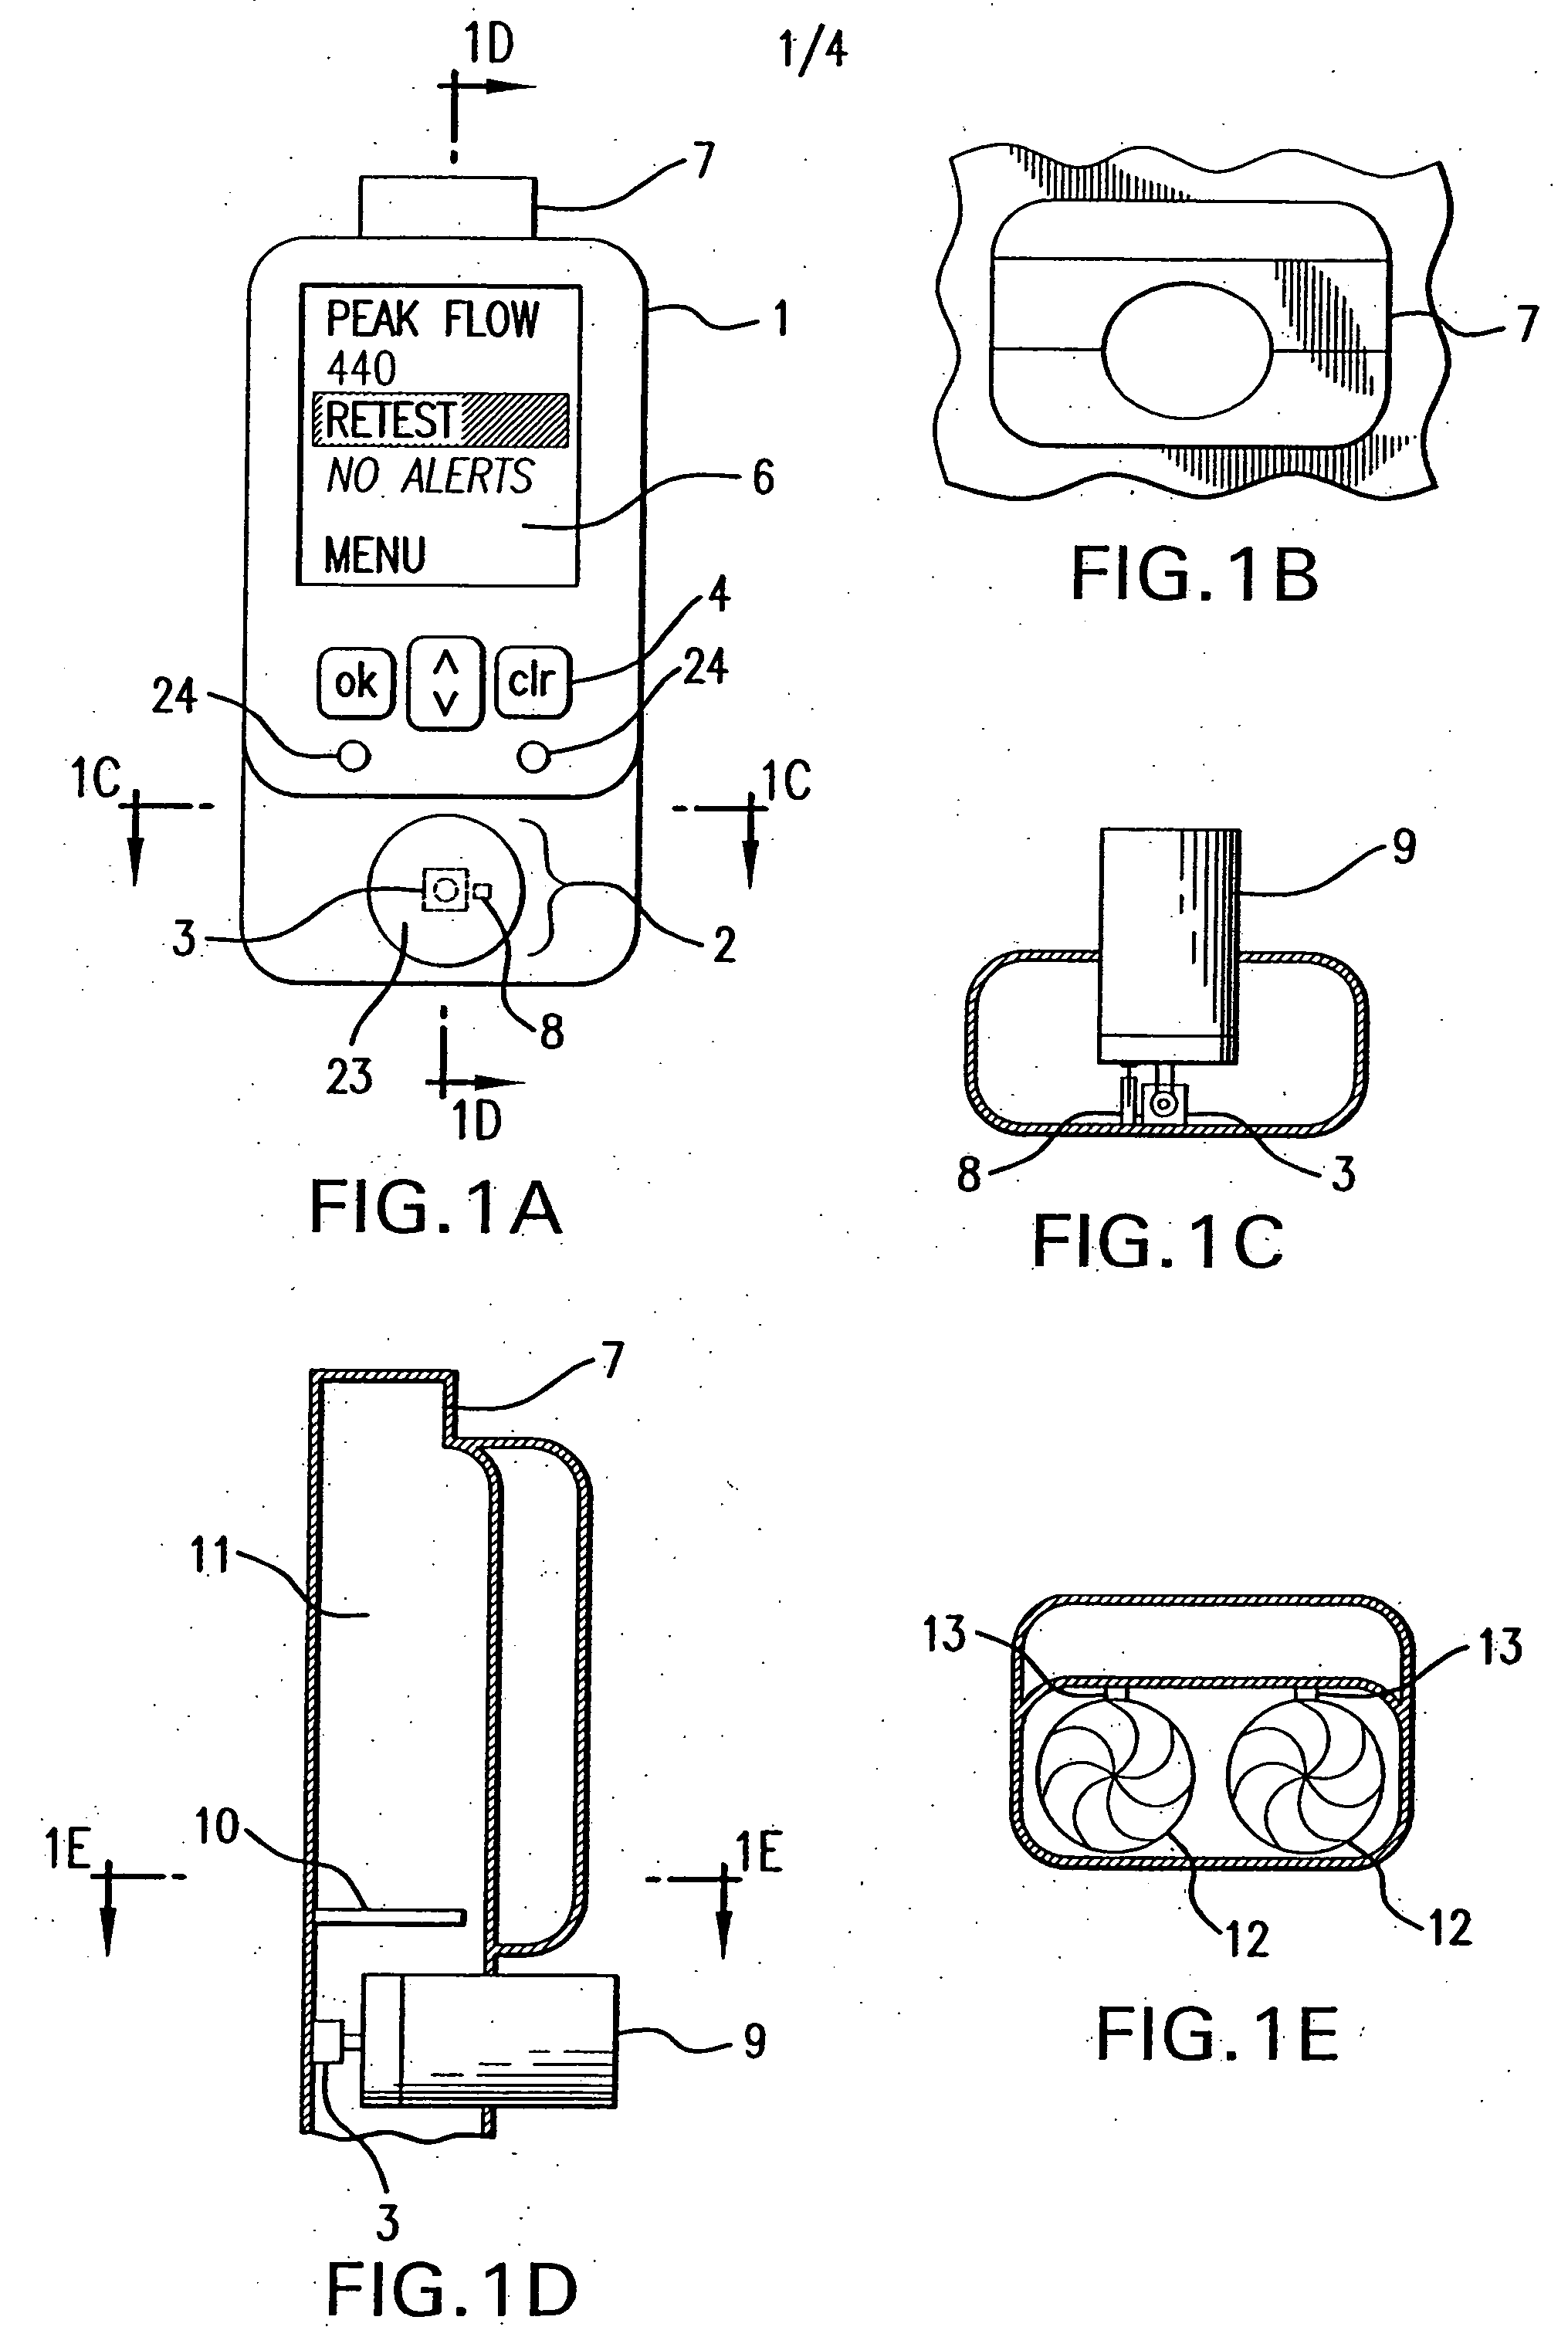 Inhalation device and system for the remote monitoring of drug administration